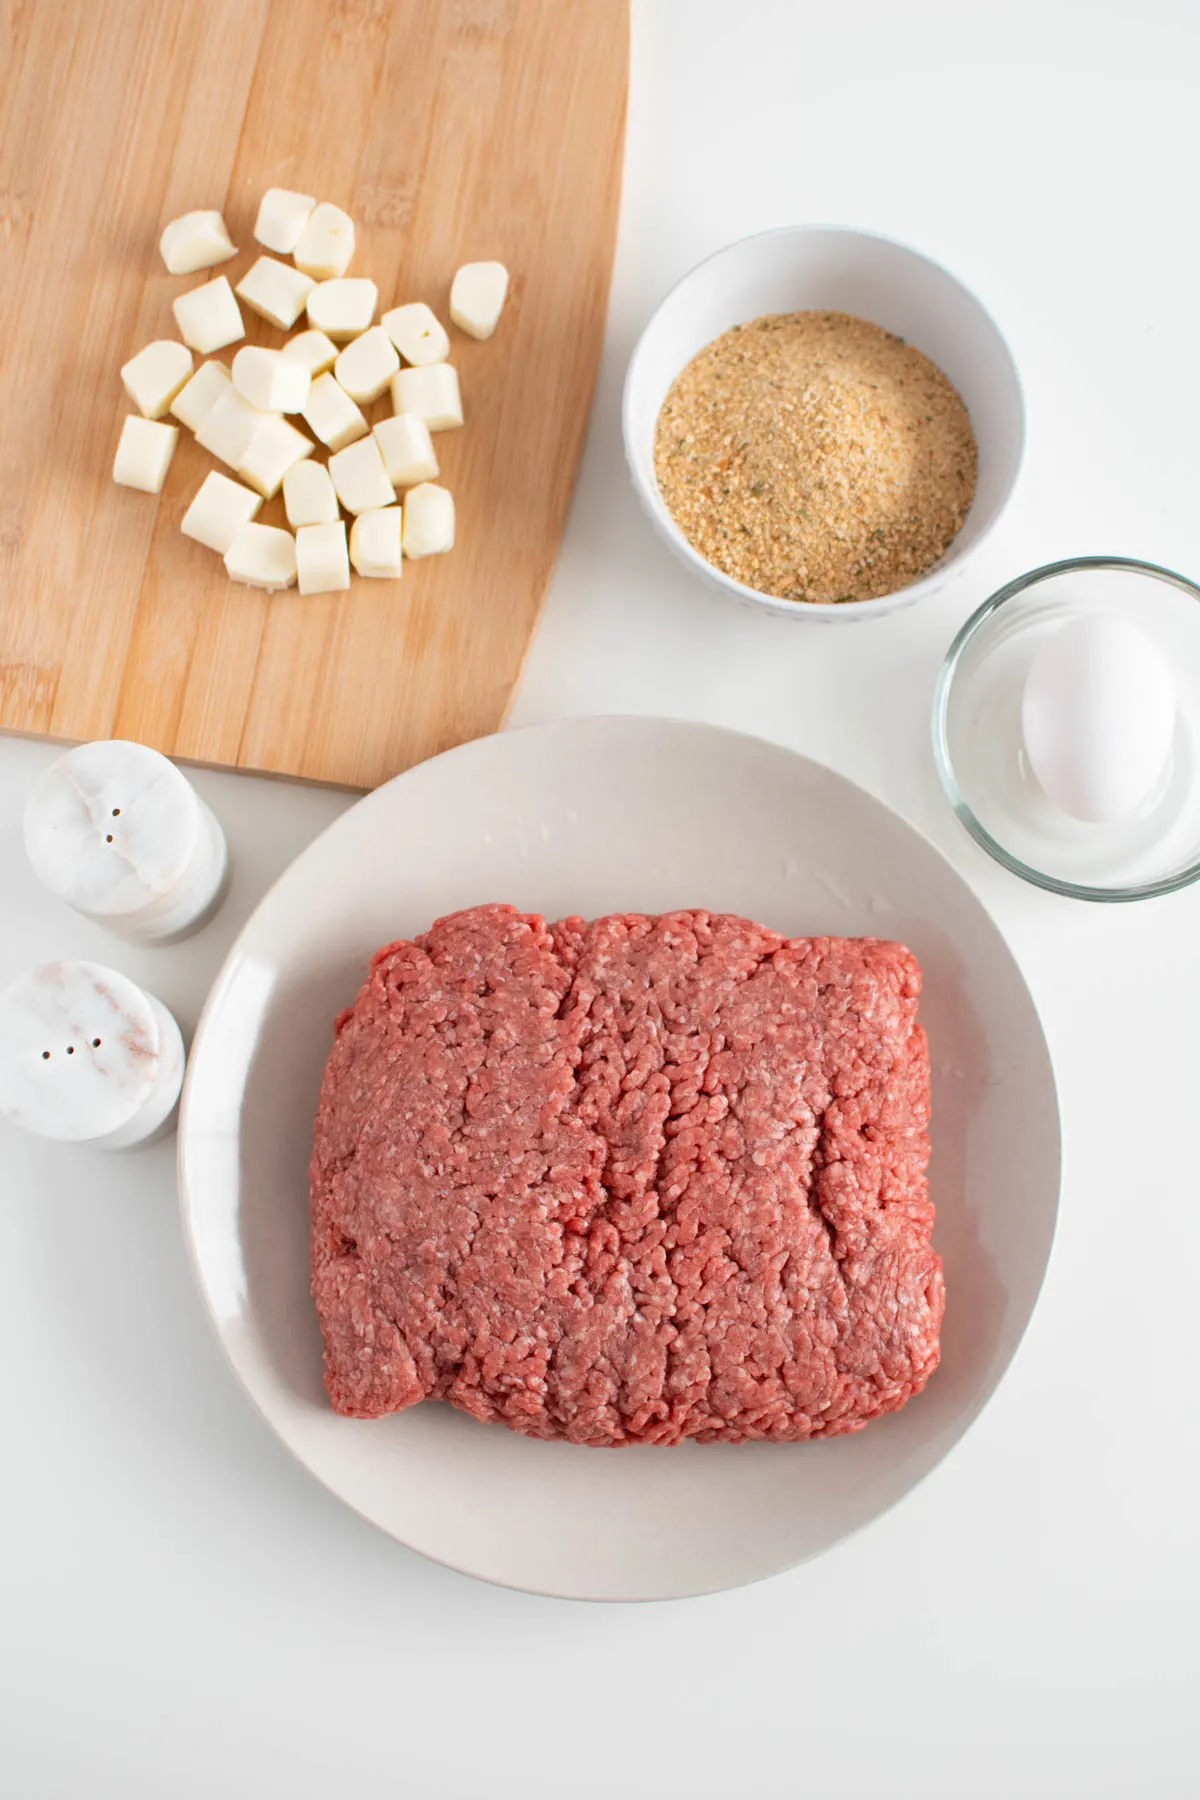 Mozzarella stuffed burger ingredients on table including ground beef, mozzarella cheese cubes, and bread crumbs.